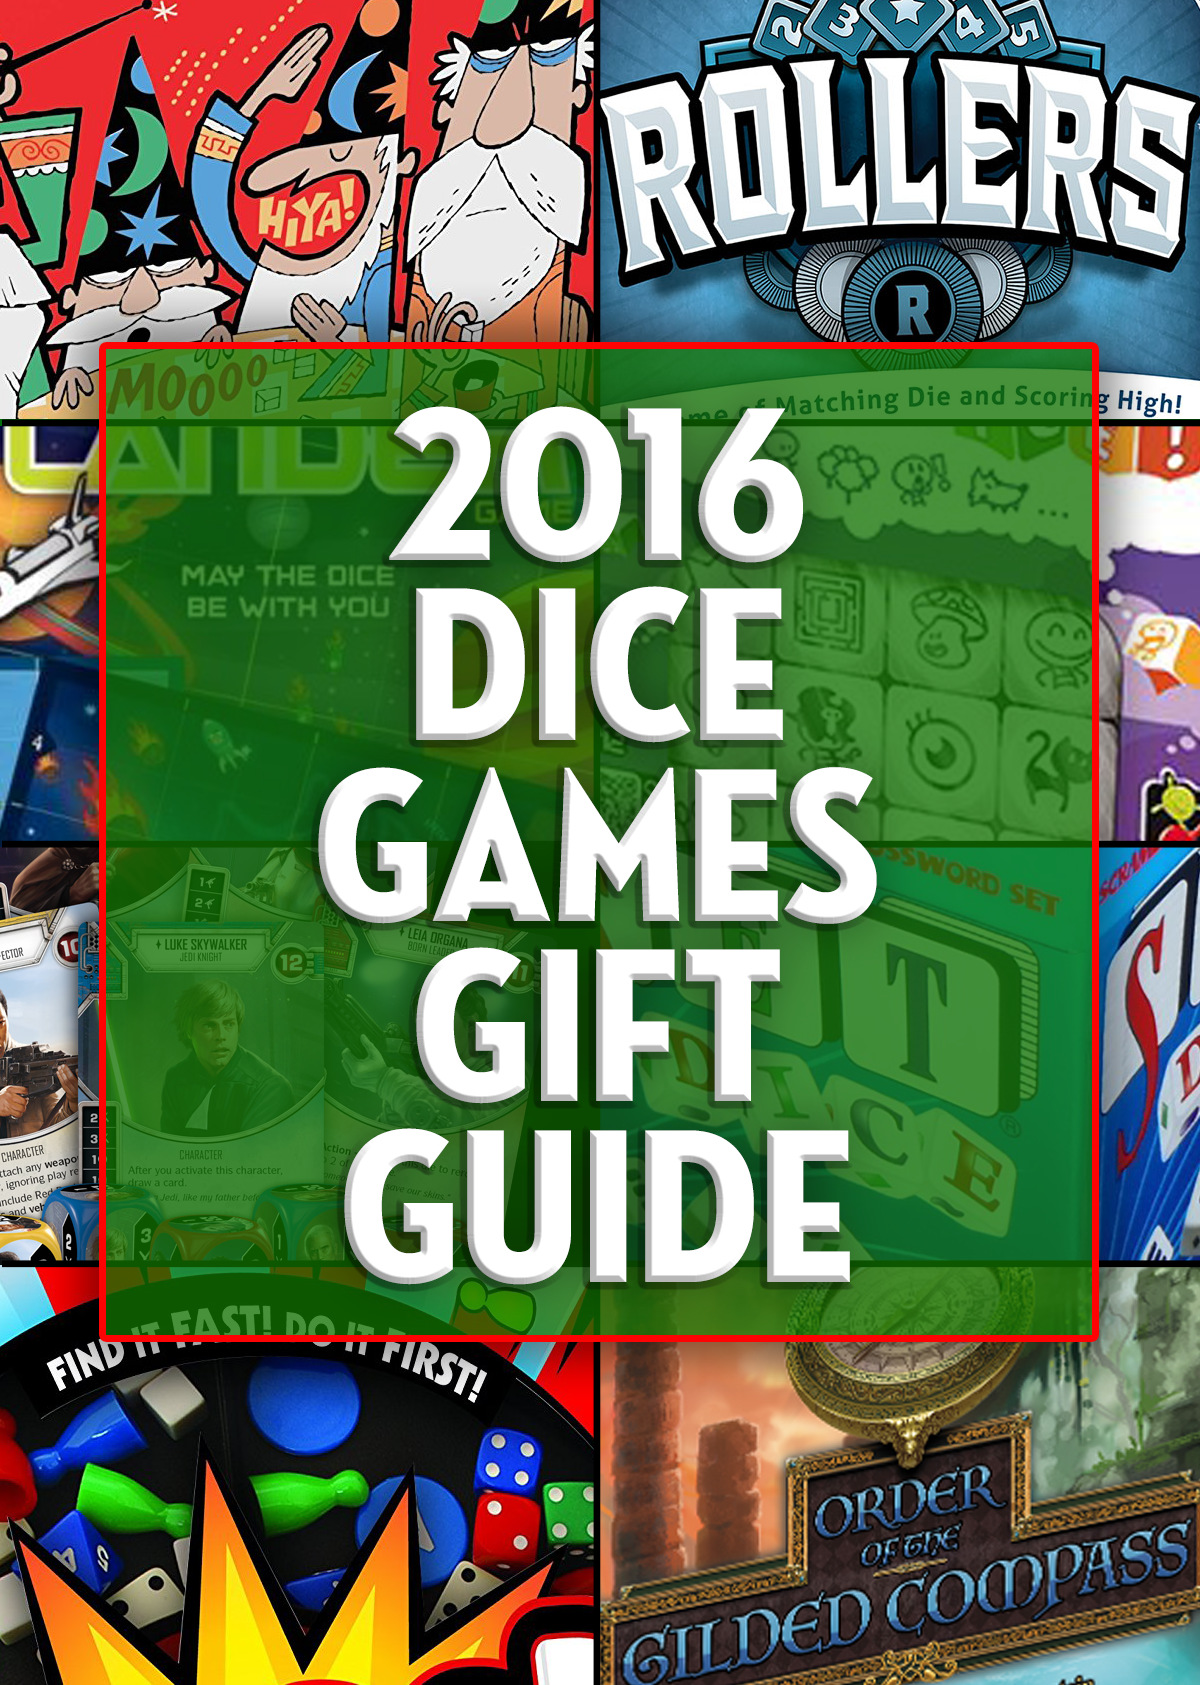 Among our favorite types of games are ones where you roll dice. This year we've put together a must-have dice game list for every collection! - SahmReviews.com